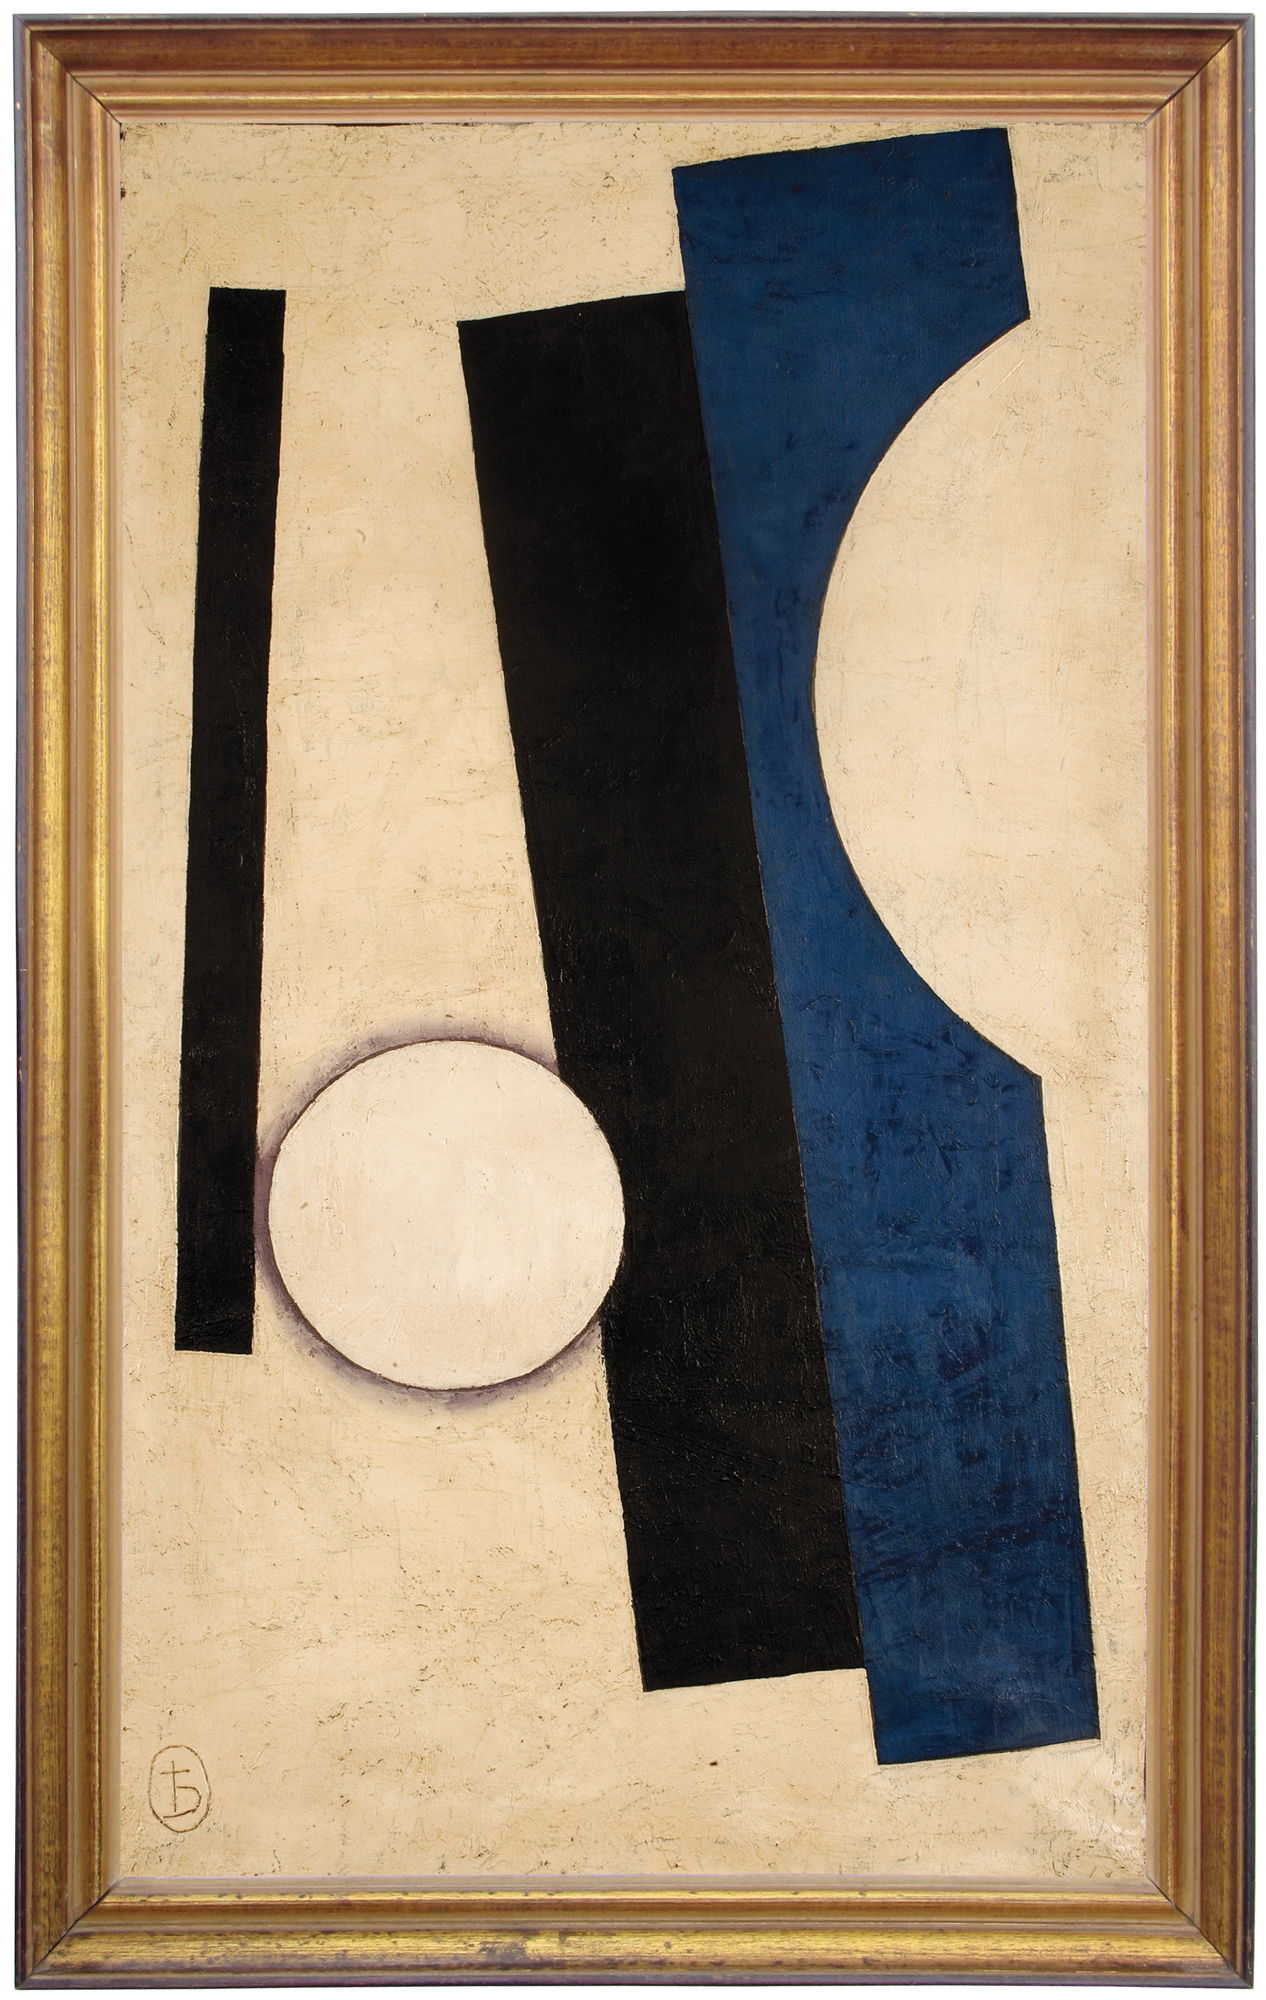  Unattributed. Signed“b” (archaic Cyrillic “yat” symbol),&nbsp;on the lower left front corner.&nbsp; In the style of Liubov Popova.&nbsp;Faint mark on the reverse appears to read “1916”. &nbsp;Oil on canvas. 83 x 50 cm.  &nbsp; 